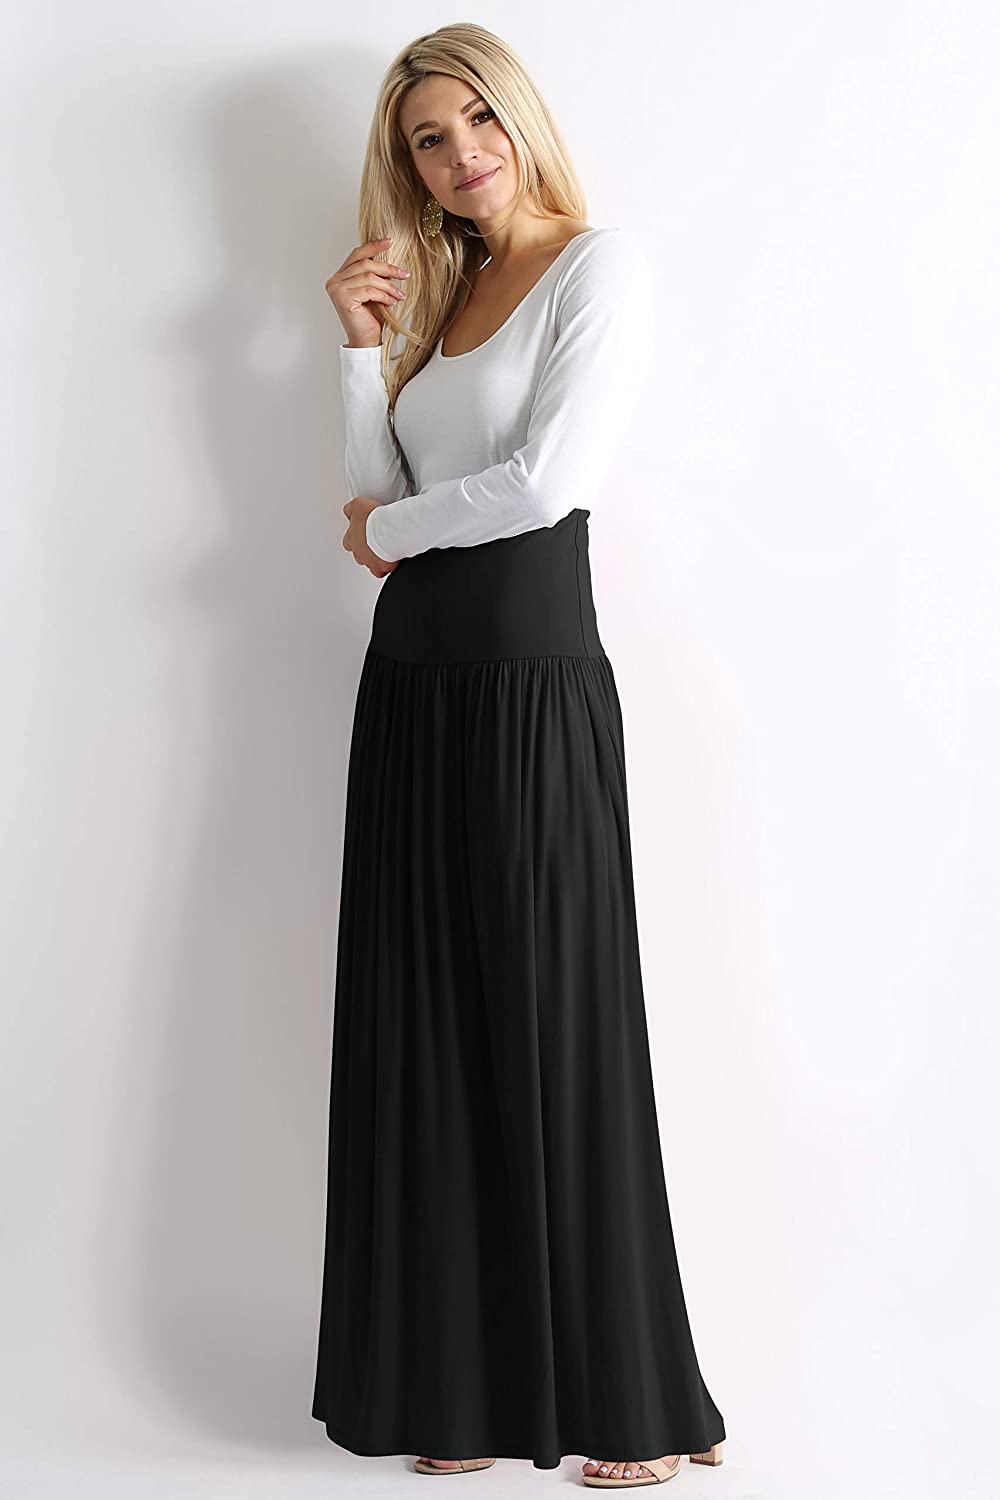 Reg And Plus Size Maxi Skirts For Women Long Length Skirts With Pockets Beach Sw Ebay